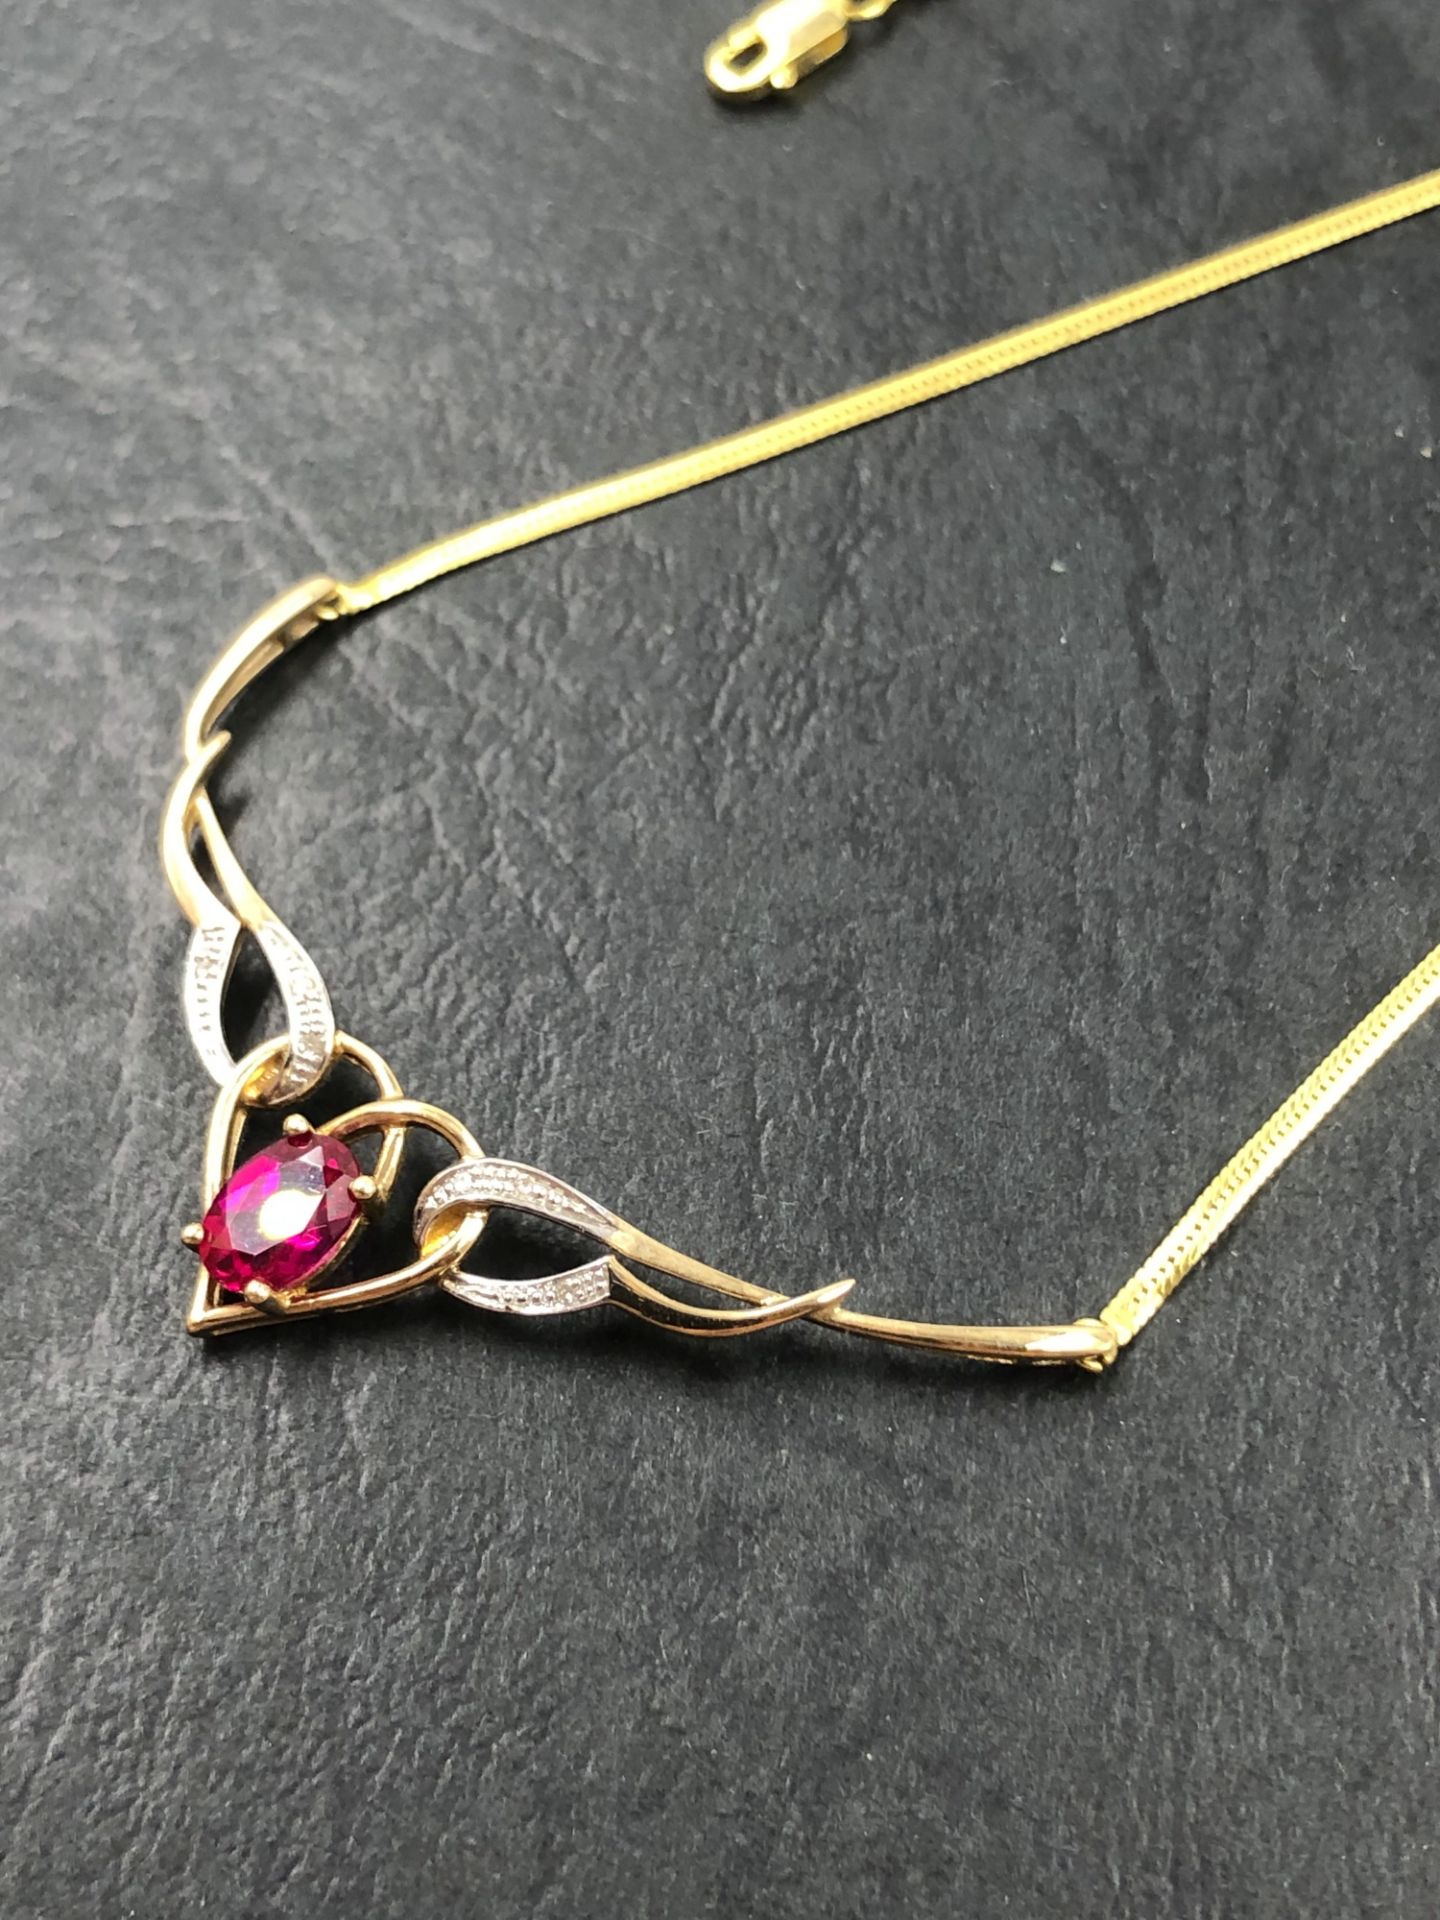 A HALLMARKED 9ct GOLD RUBY AND DIAMOND NECKLACE. THE OVAL CUT RUBY MEASUREMENTS 7.0 X 5.0 D 3.4mm. - Image 3 of 3